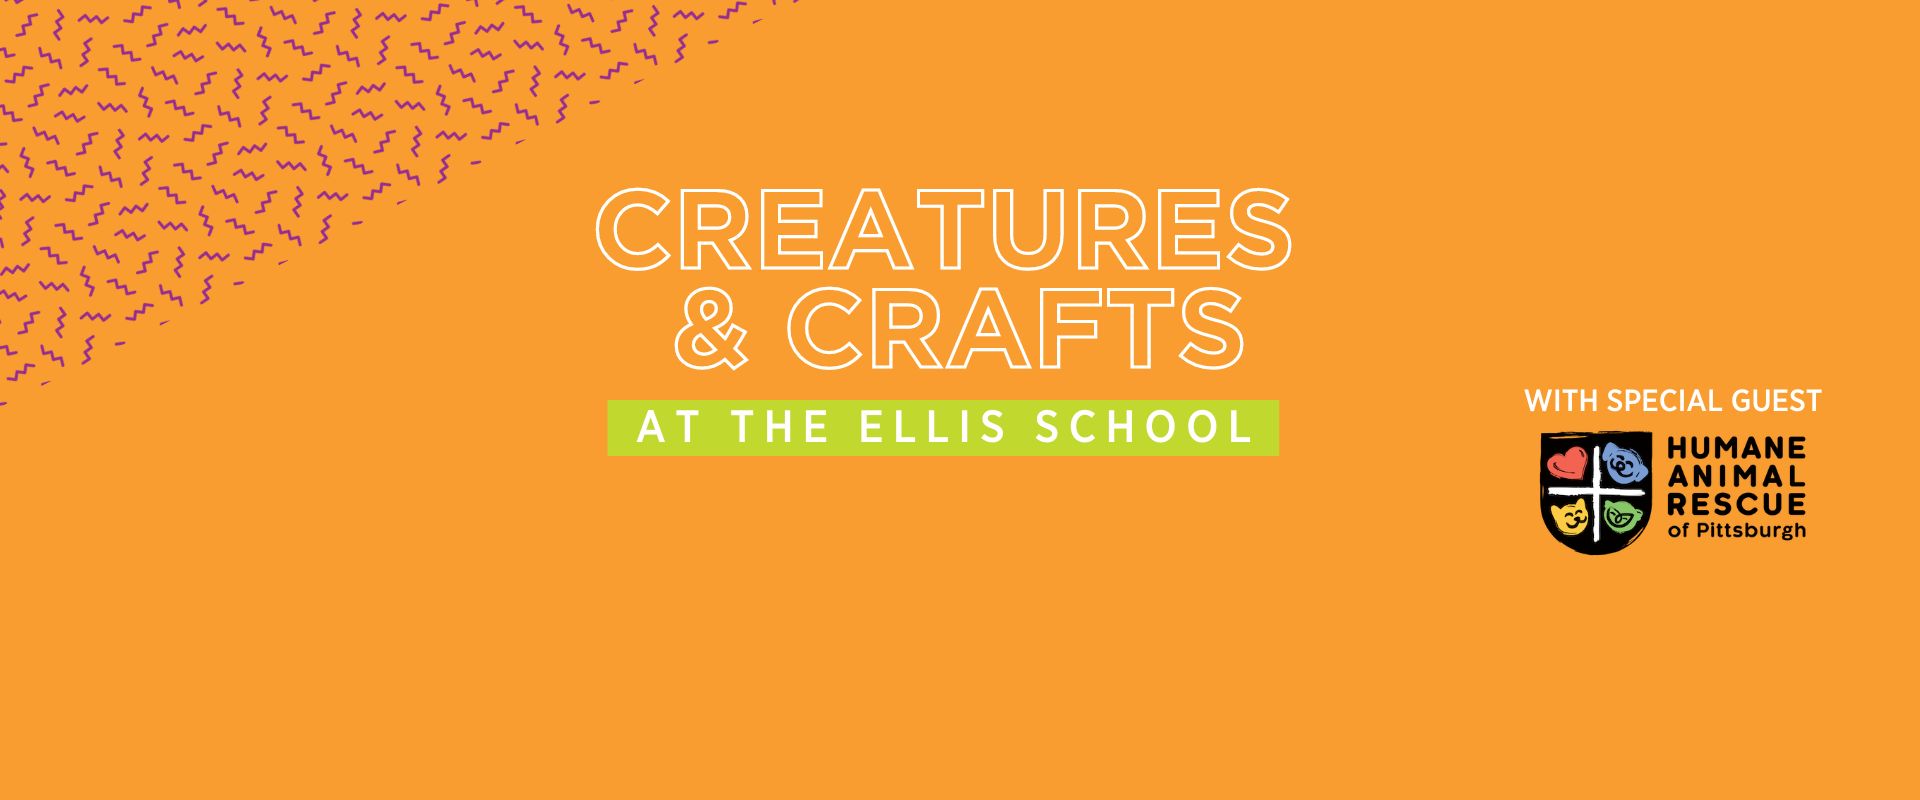 Creatures & Crafts at The Ellis School with Special Guest Humane Animal Rescue of Pittsburgh